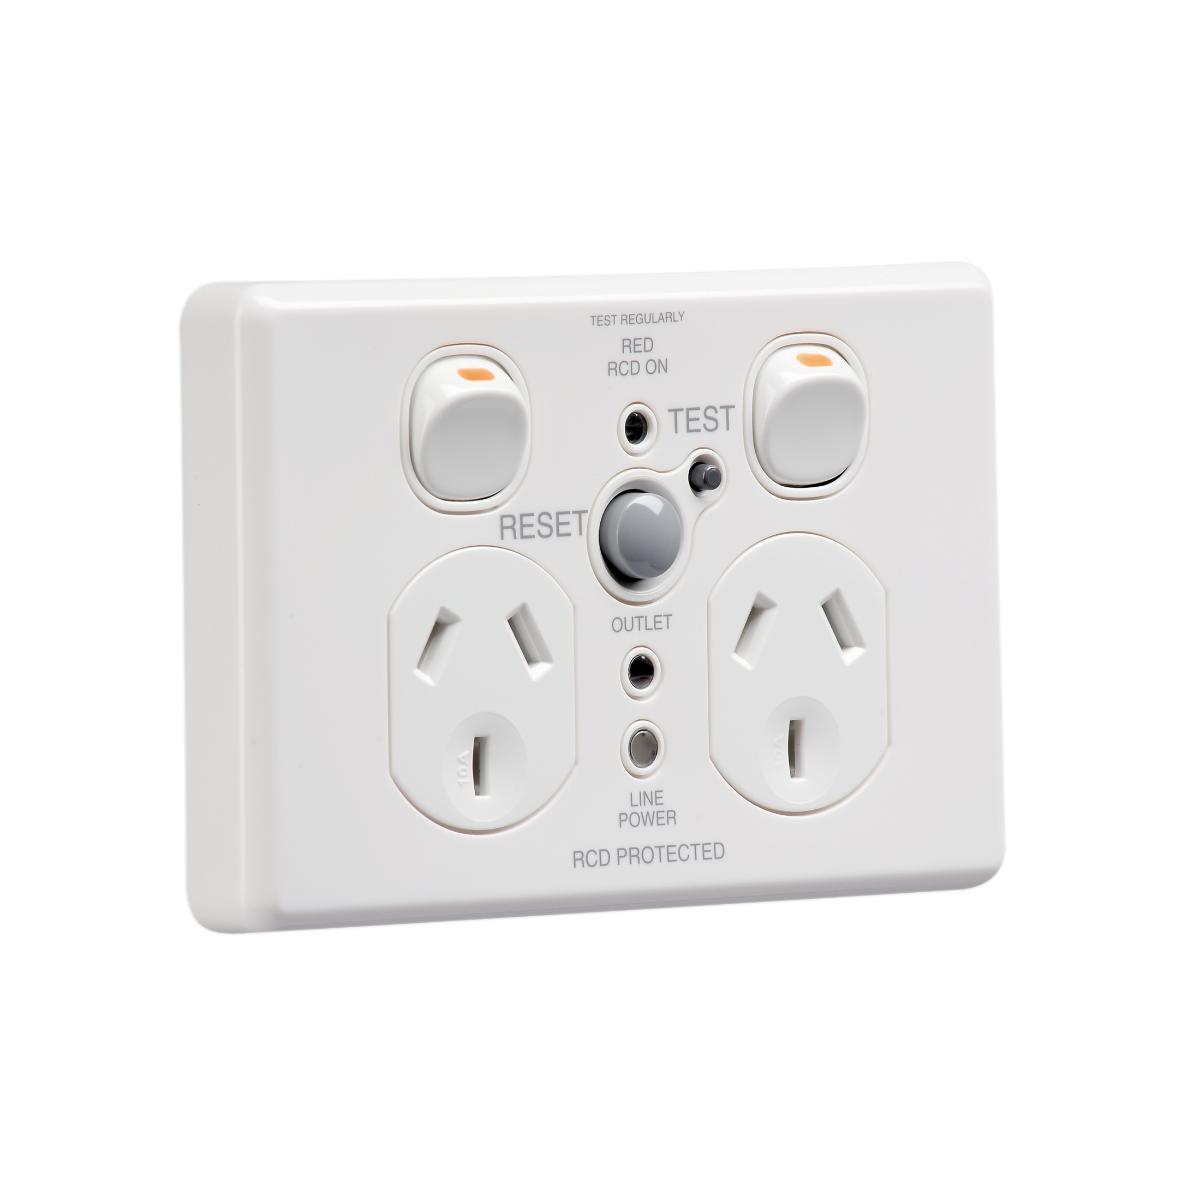 GPO DOUBLE 10A RCD PROTECTED 30MA WHITE